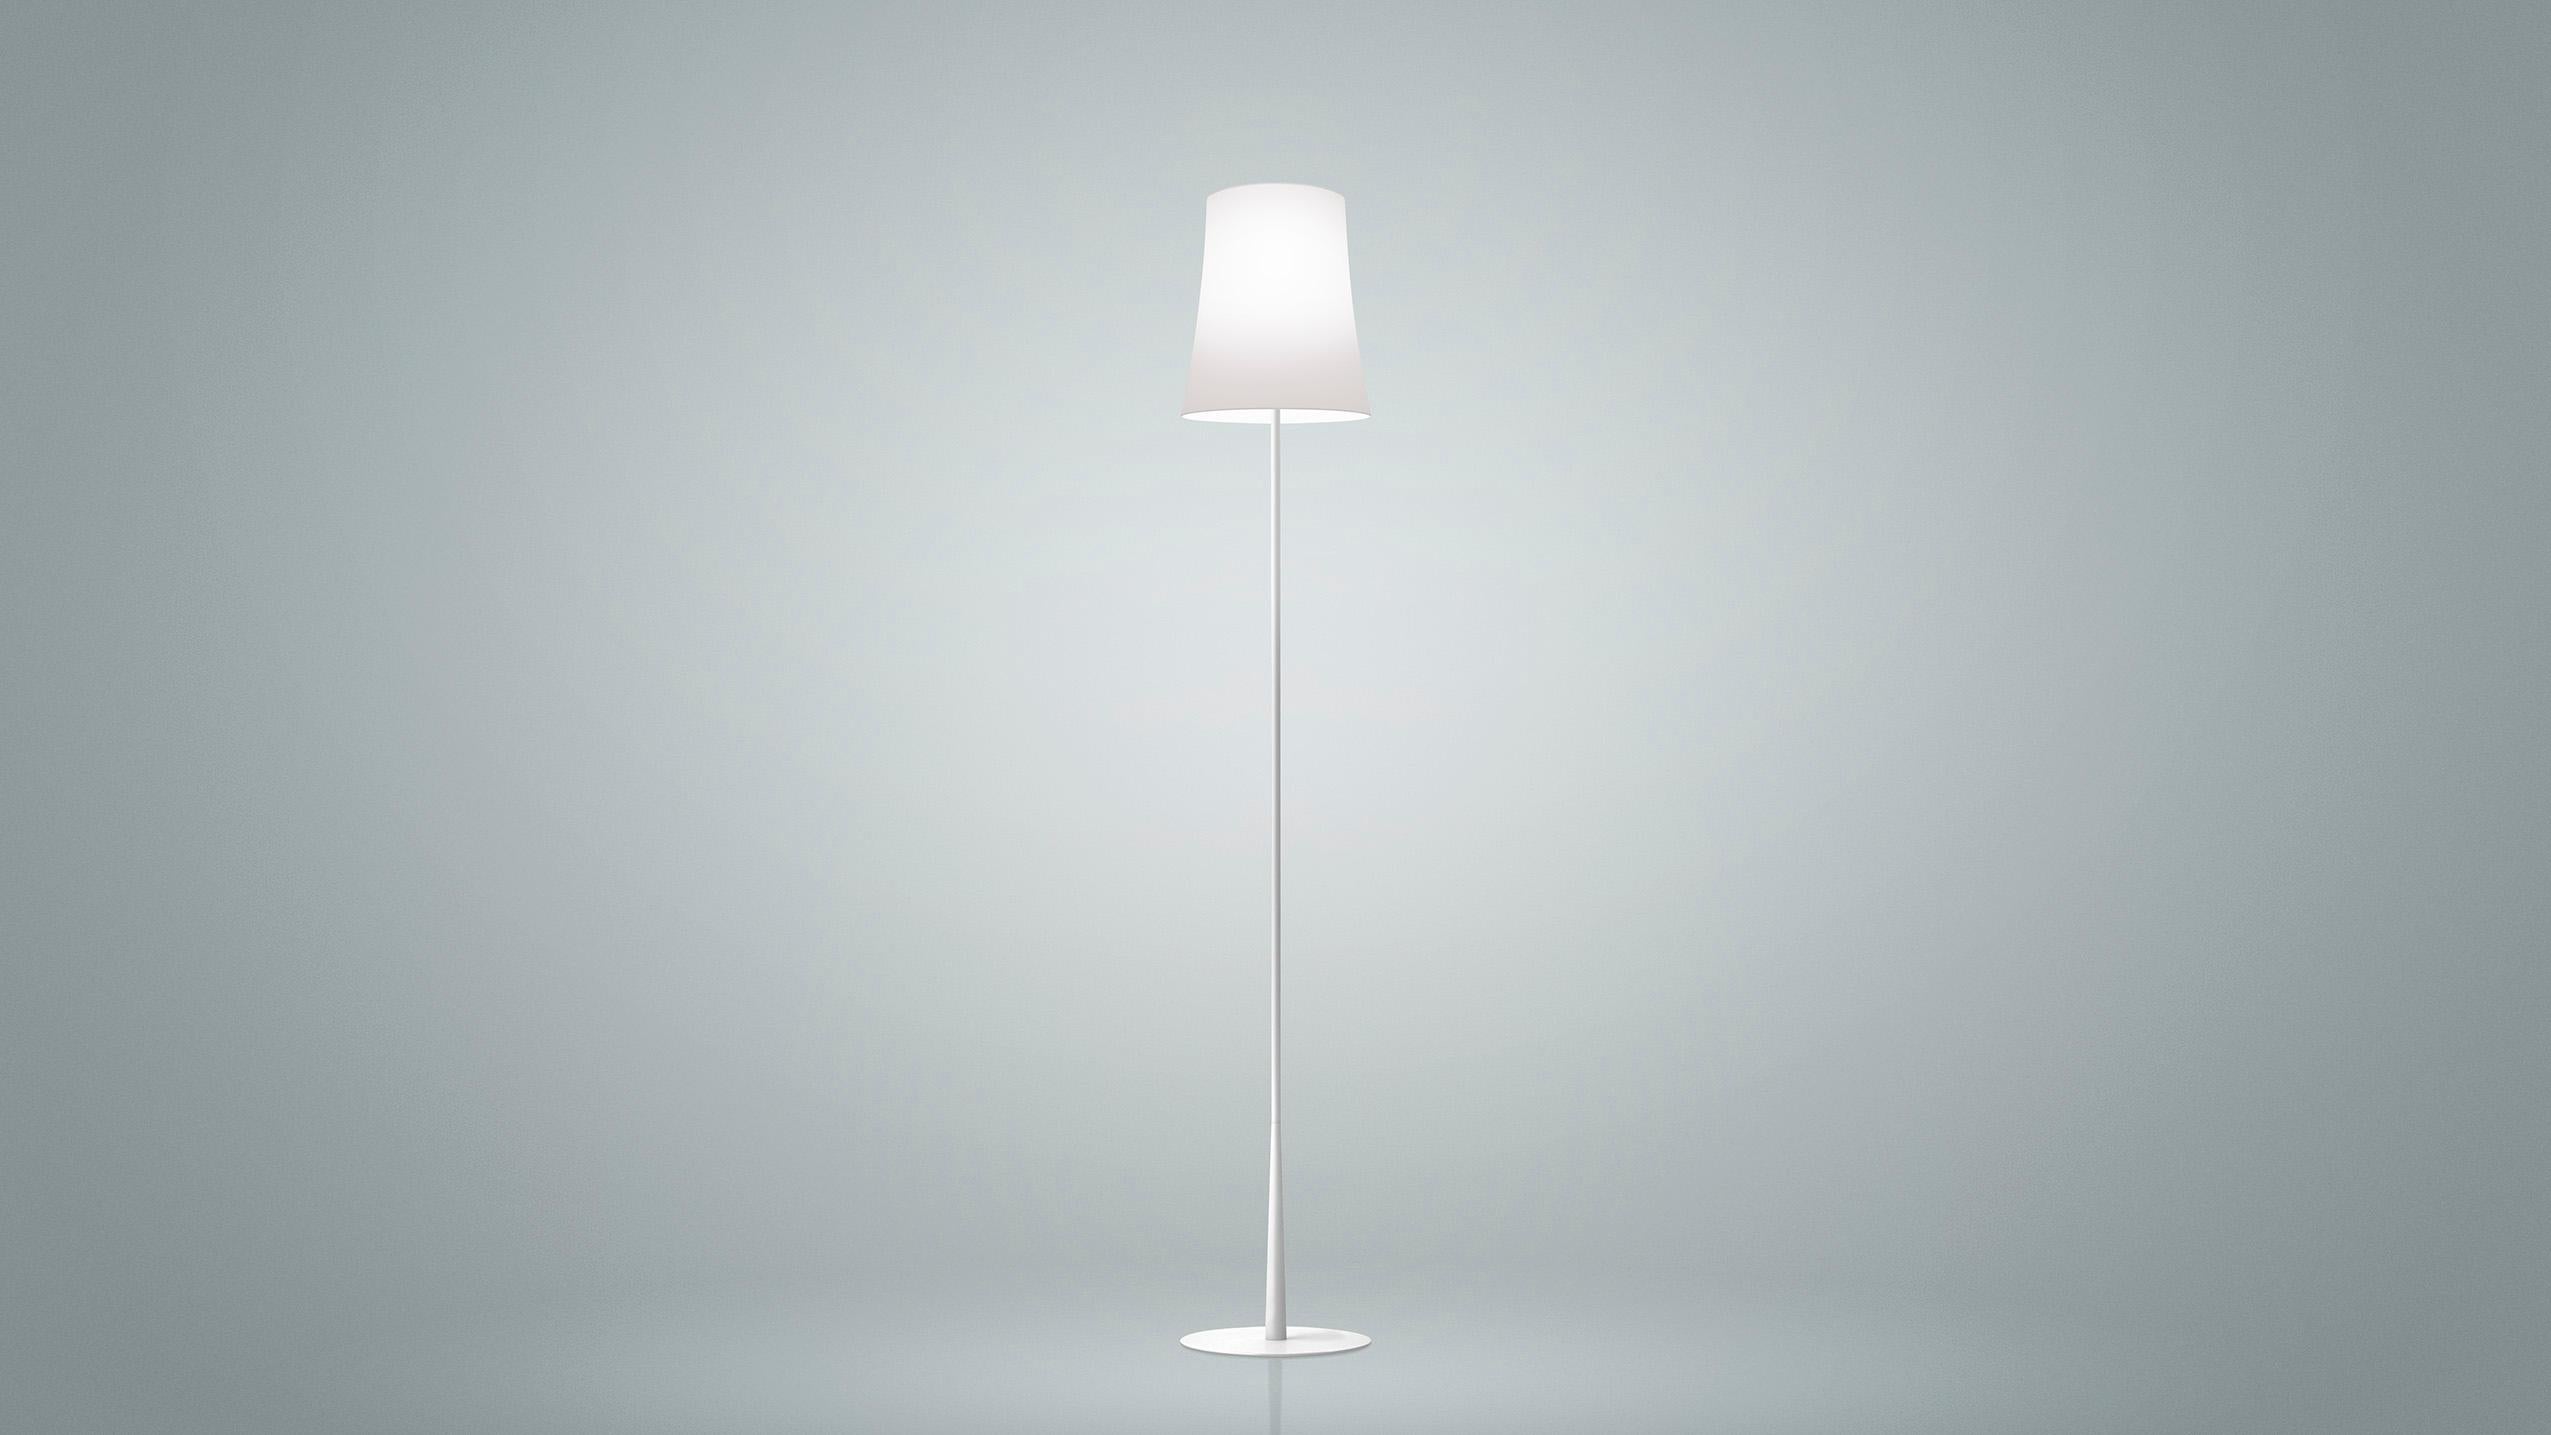 Foscarini Birdie Easy Floor Lamp in Red Brick by Ludovica & Roberto Palomba In New Condition For Sale In Brooklyn, NY